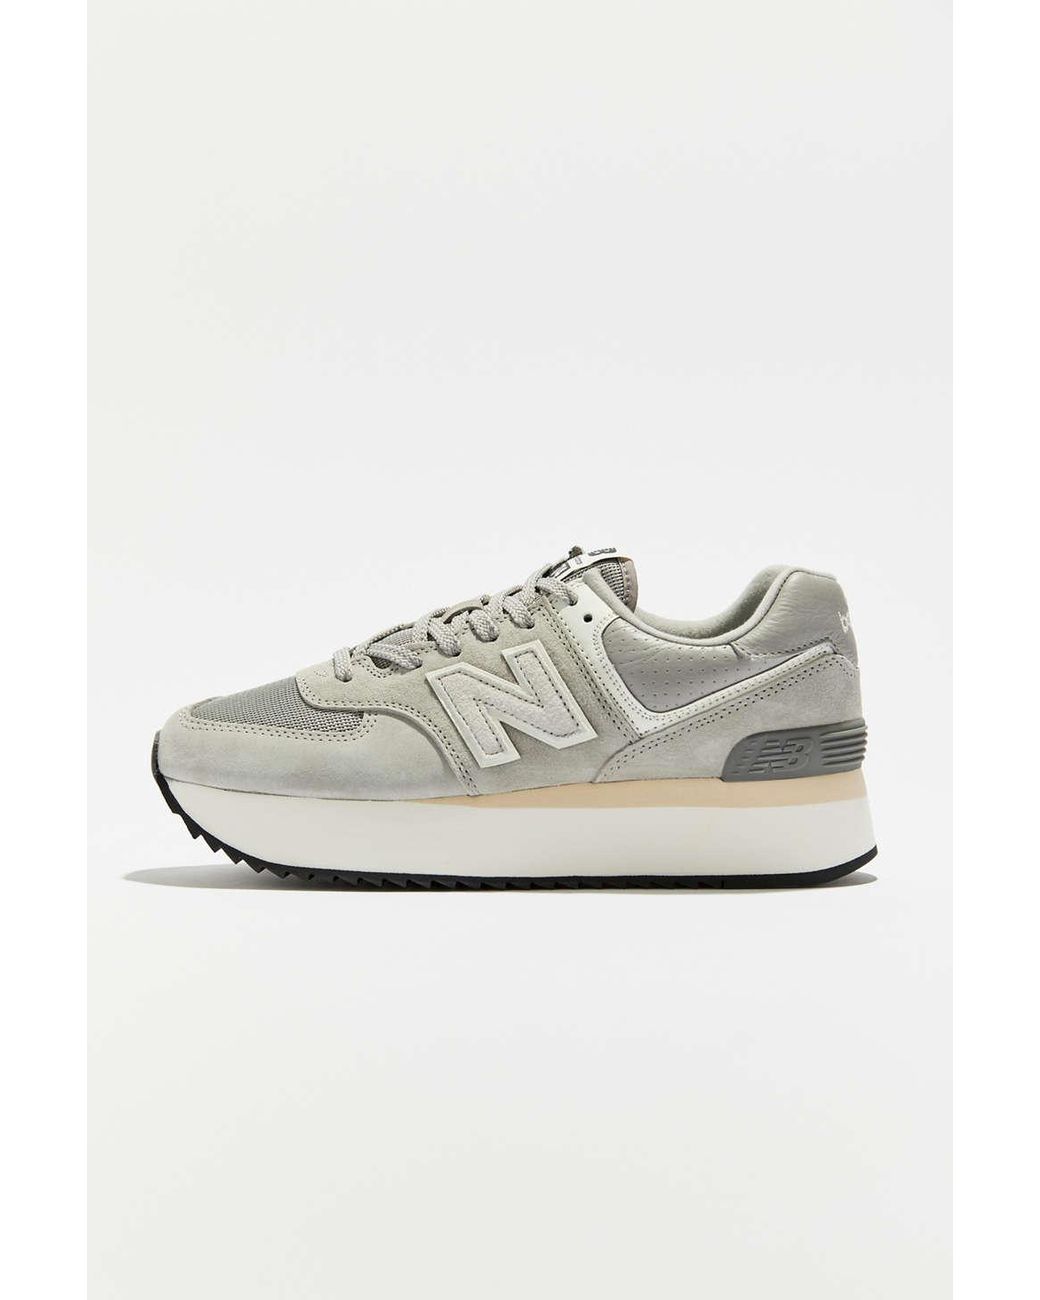 New Balance Leather 574+ Platform Sneaker in White | Lyst Canada